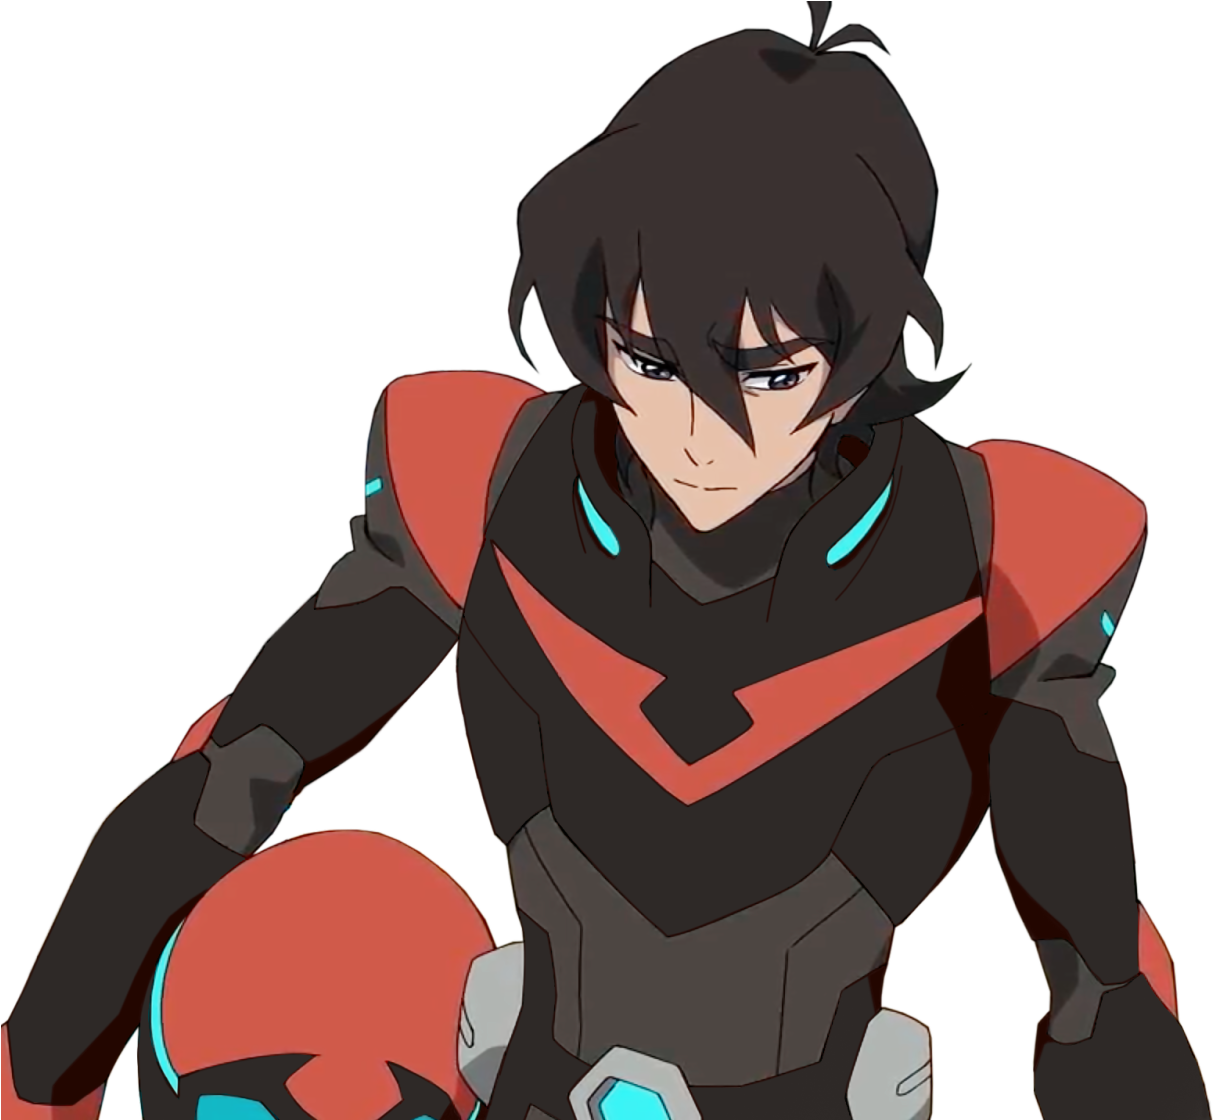 Voltron On Tumblr - Voltron Keith Black Lion, Find more high quality free t...